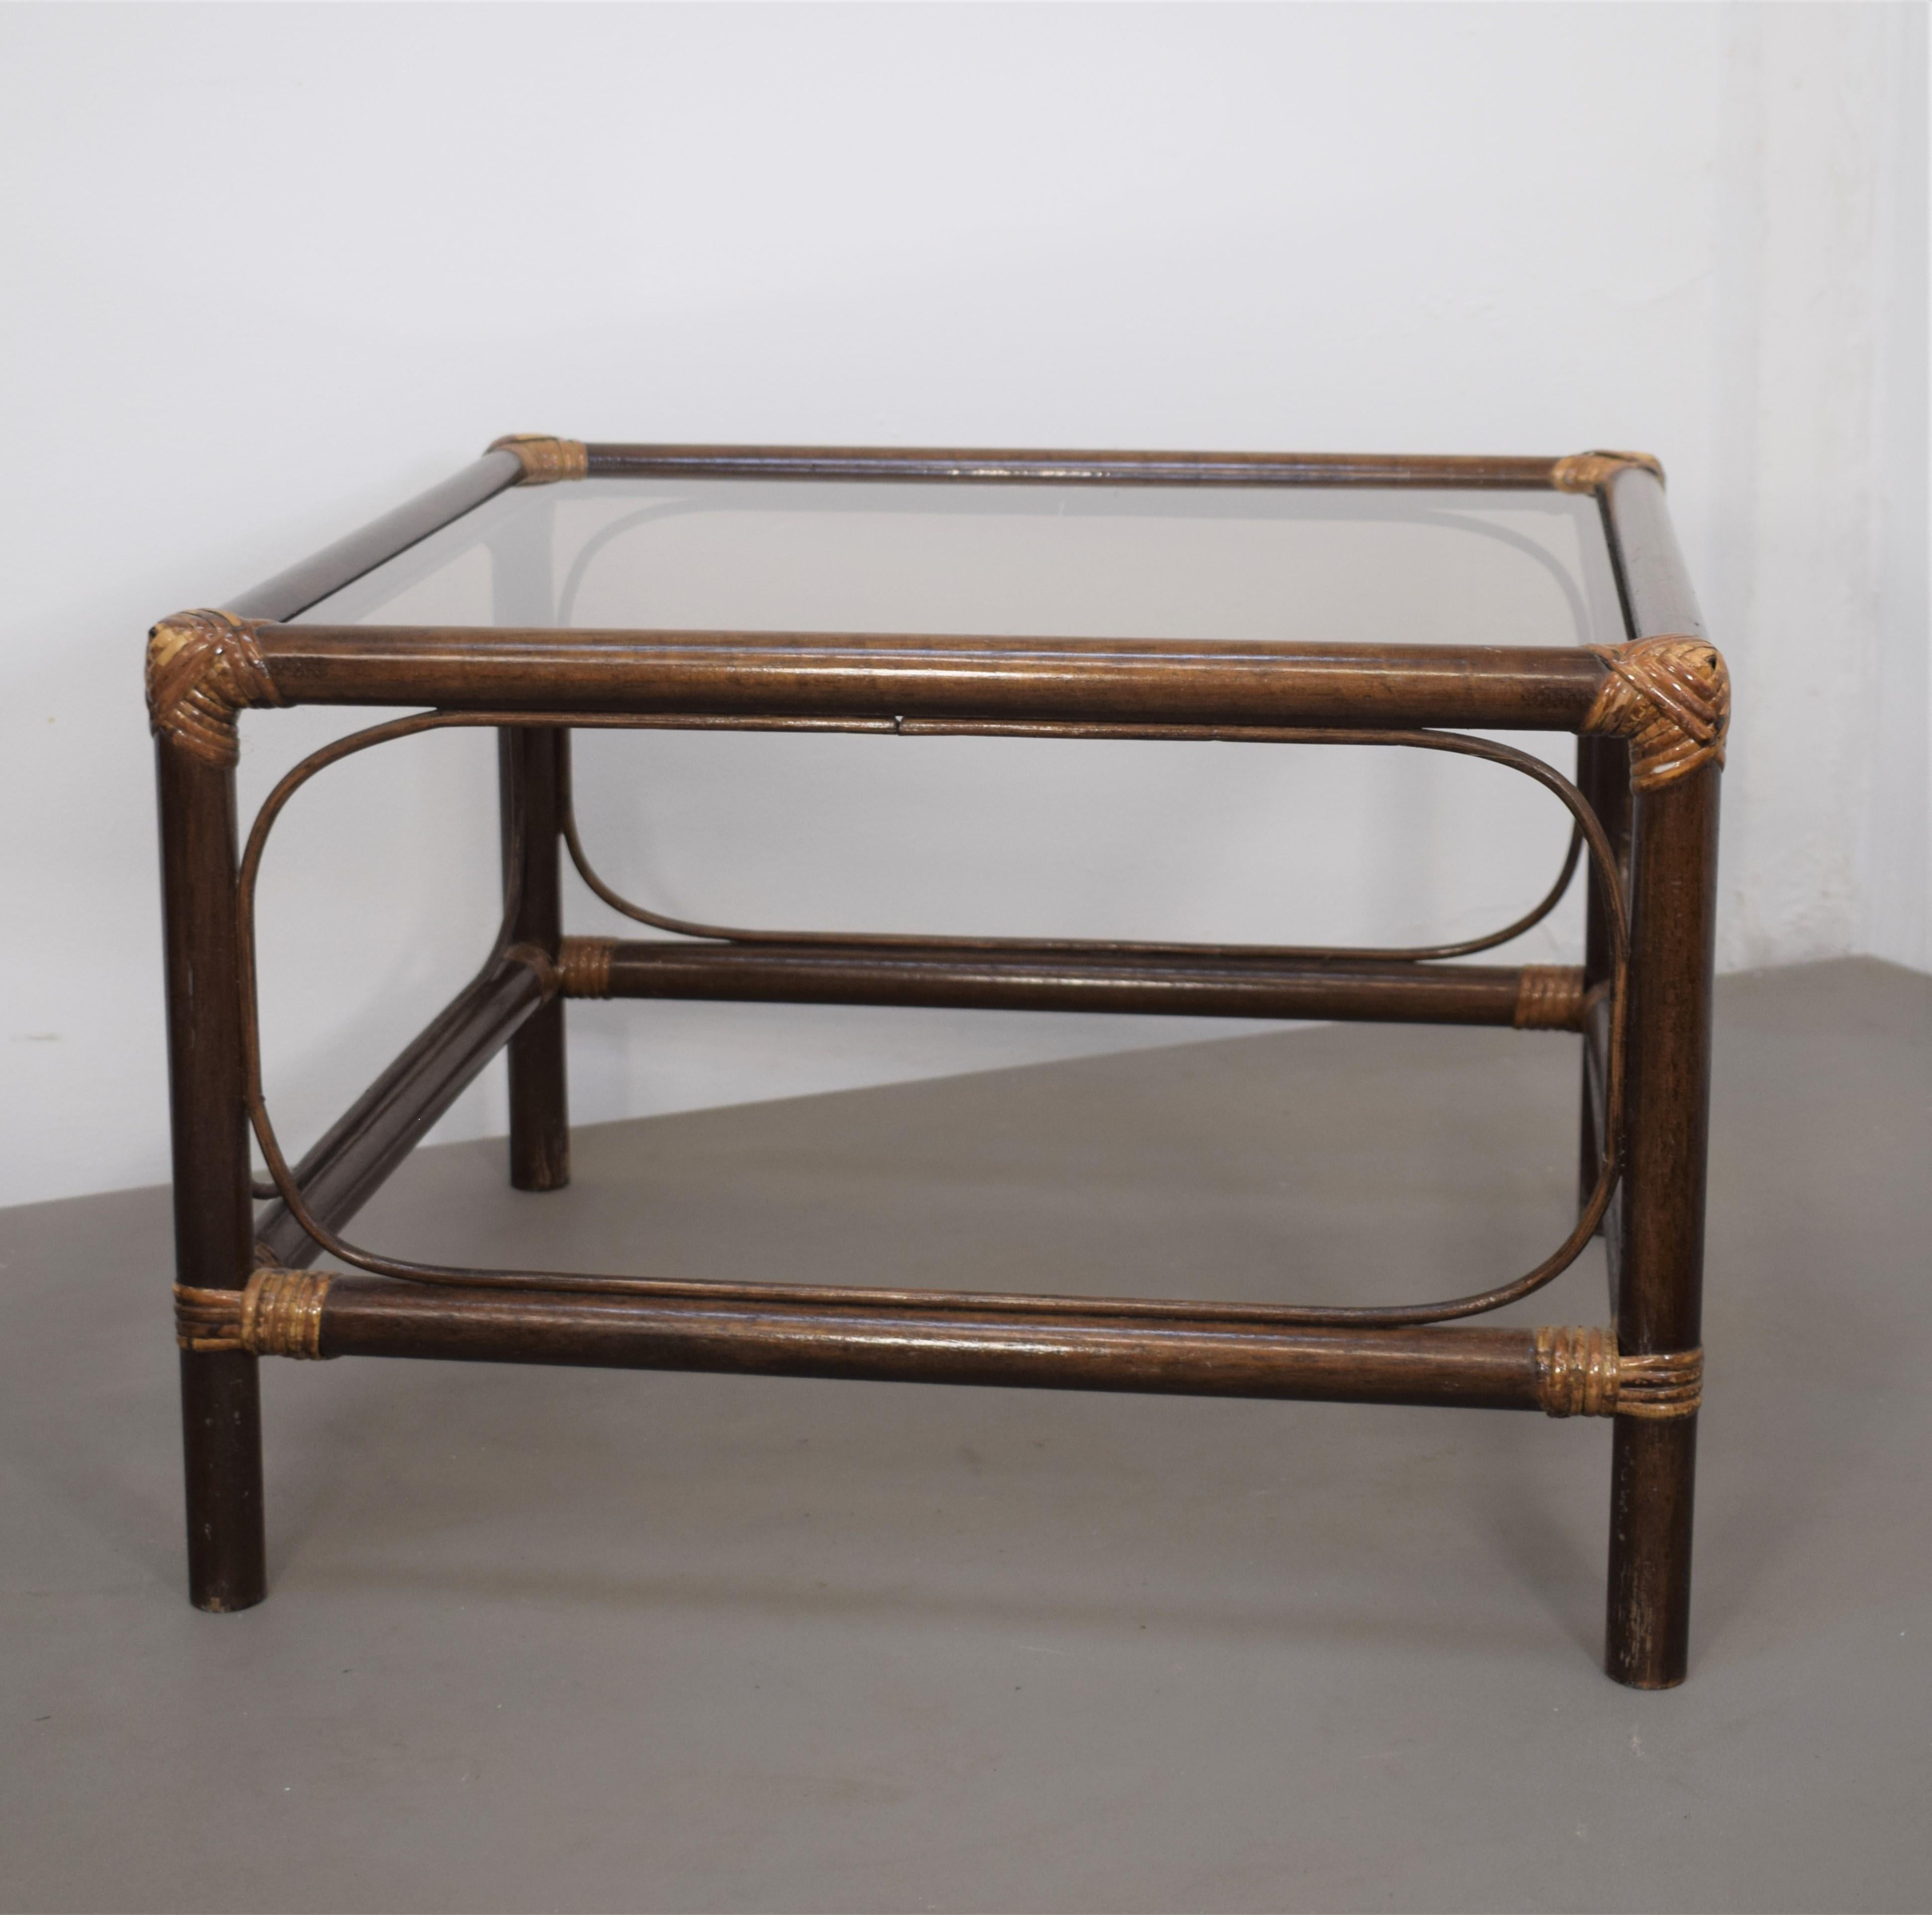 Mid-Century Modern Italian Bamboo and Smoked Glass Coffee Table, 1960s For Sale